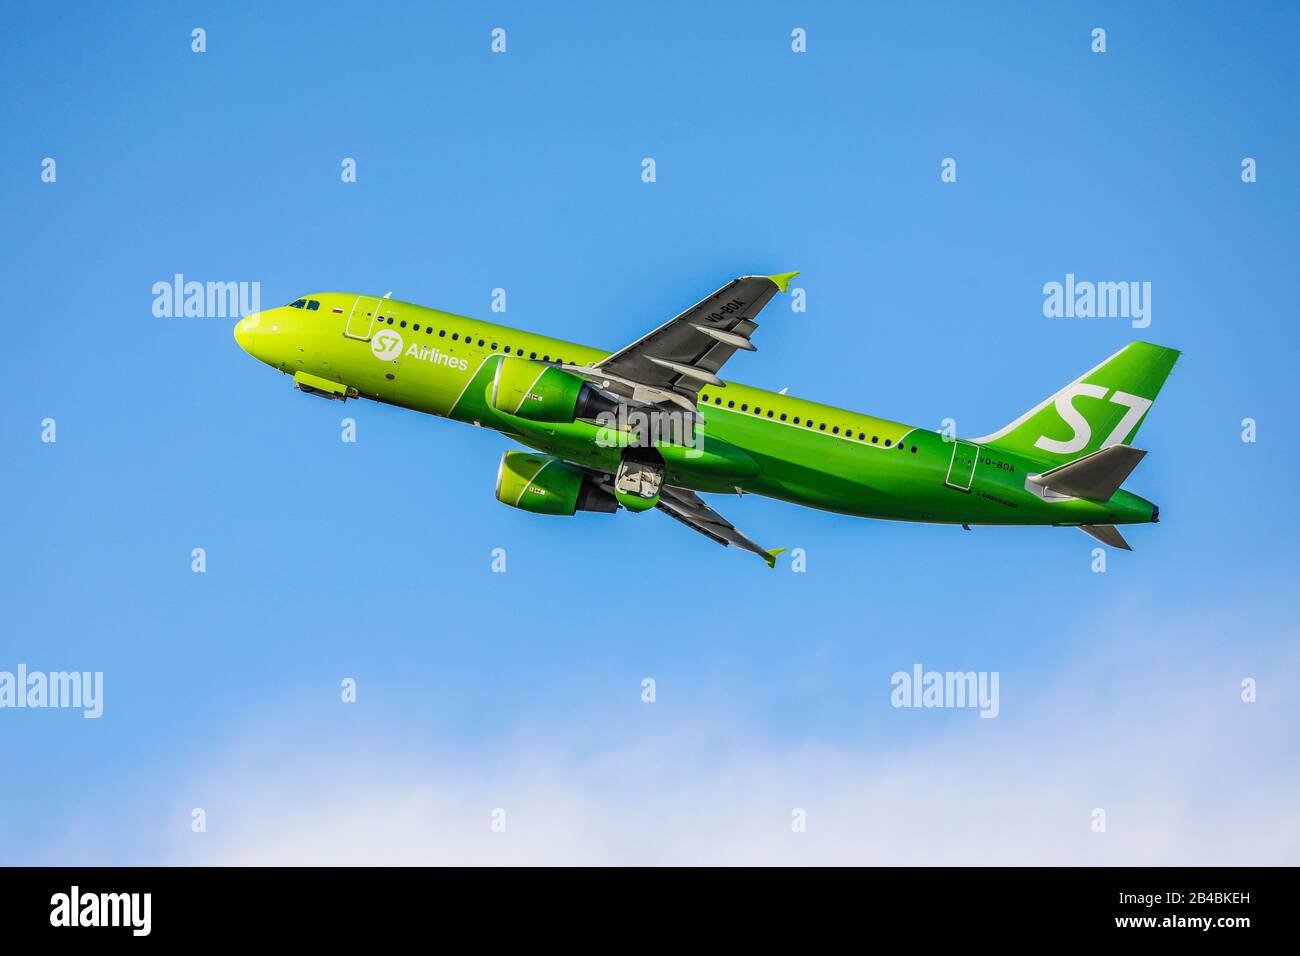 Duesseldorf, North Rhine-Westphalia, Germany - Russian S7 Airlines, Airbus A320 aircraft takes off at Duesseldorf International Airport, VQ-BOA S7 SIB Stock Photo